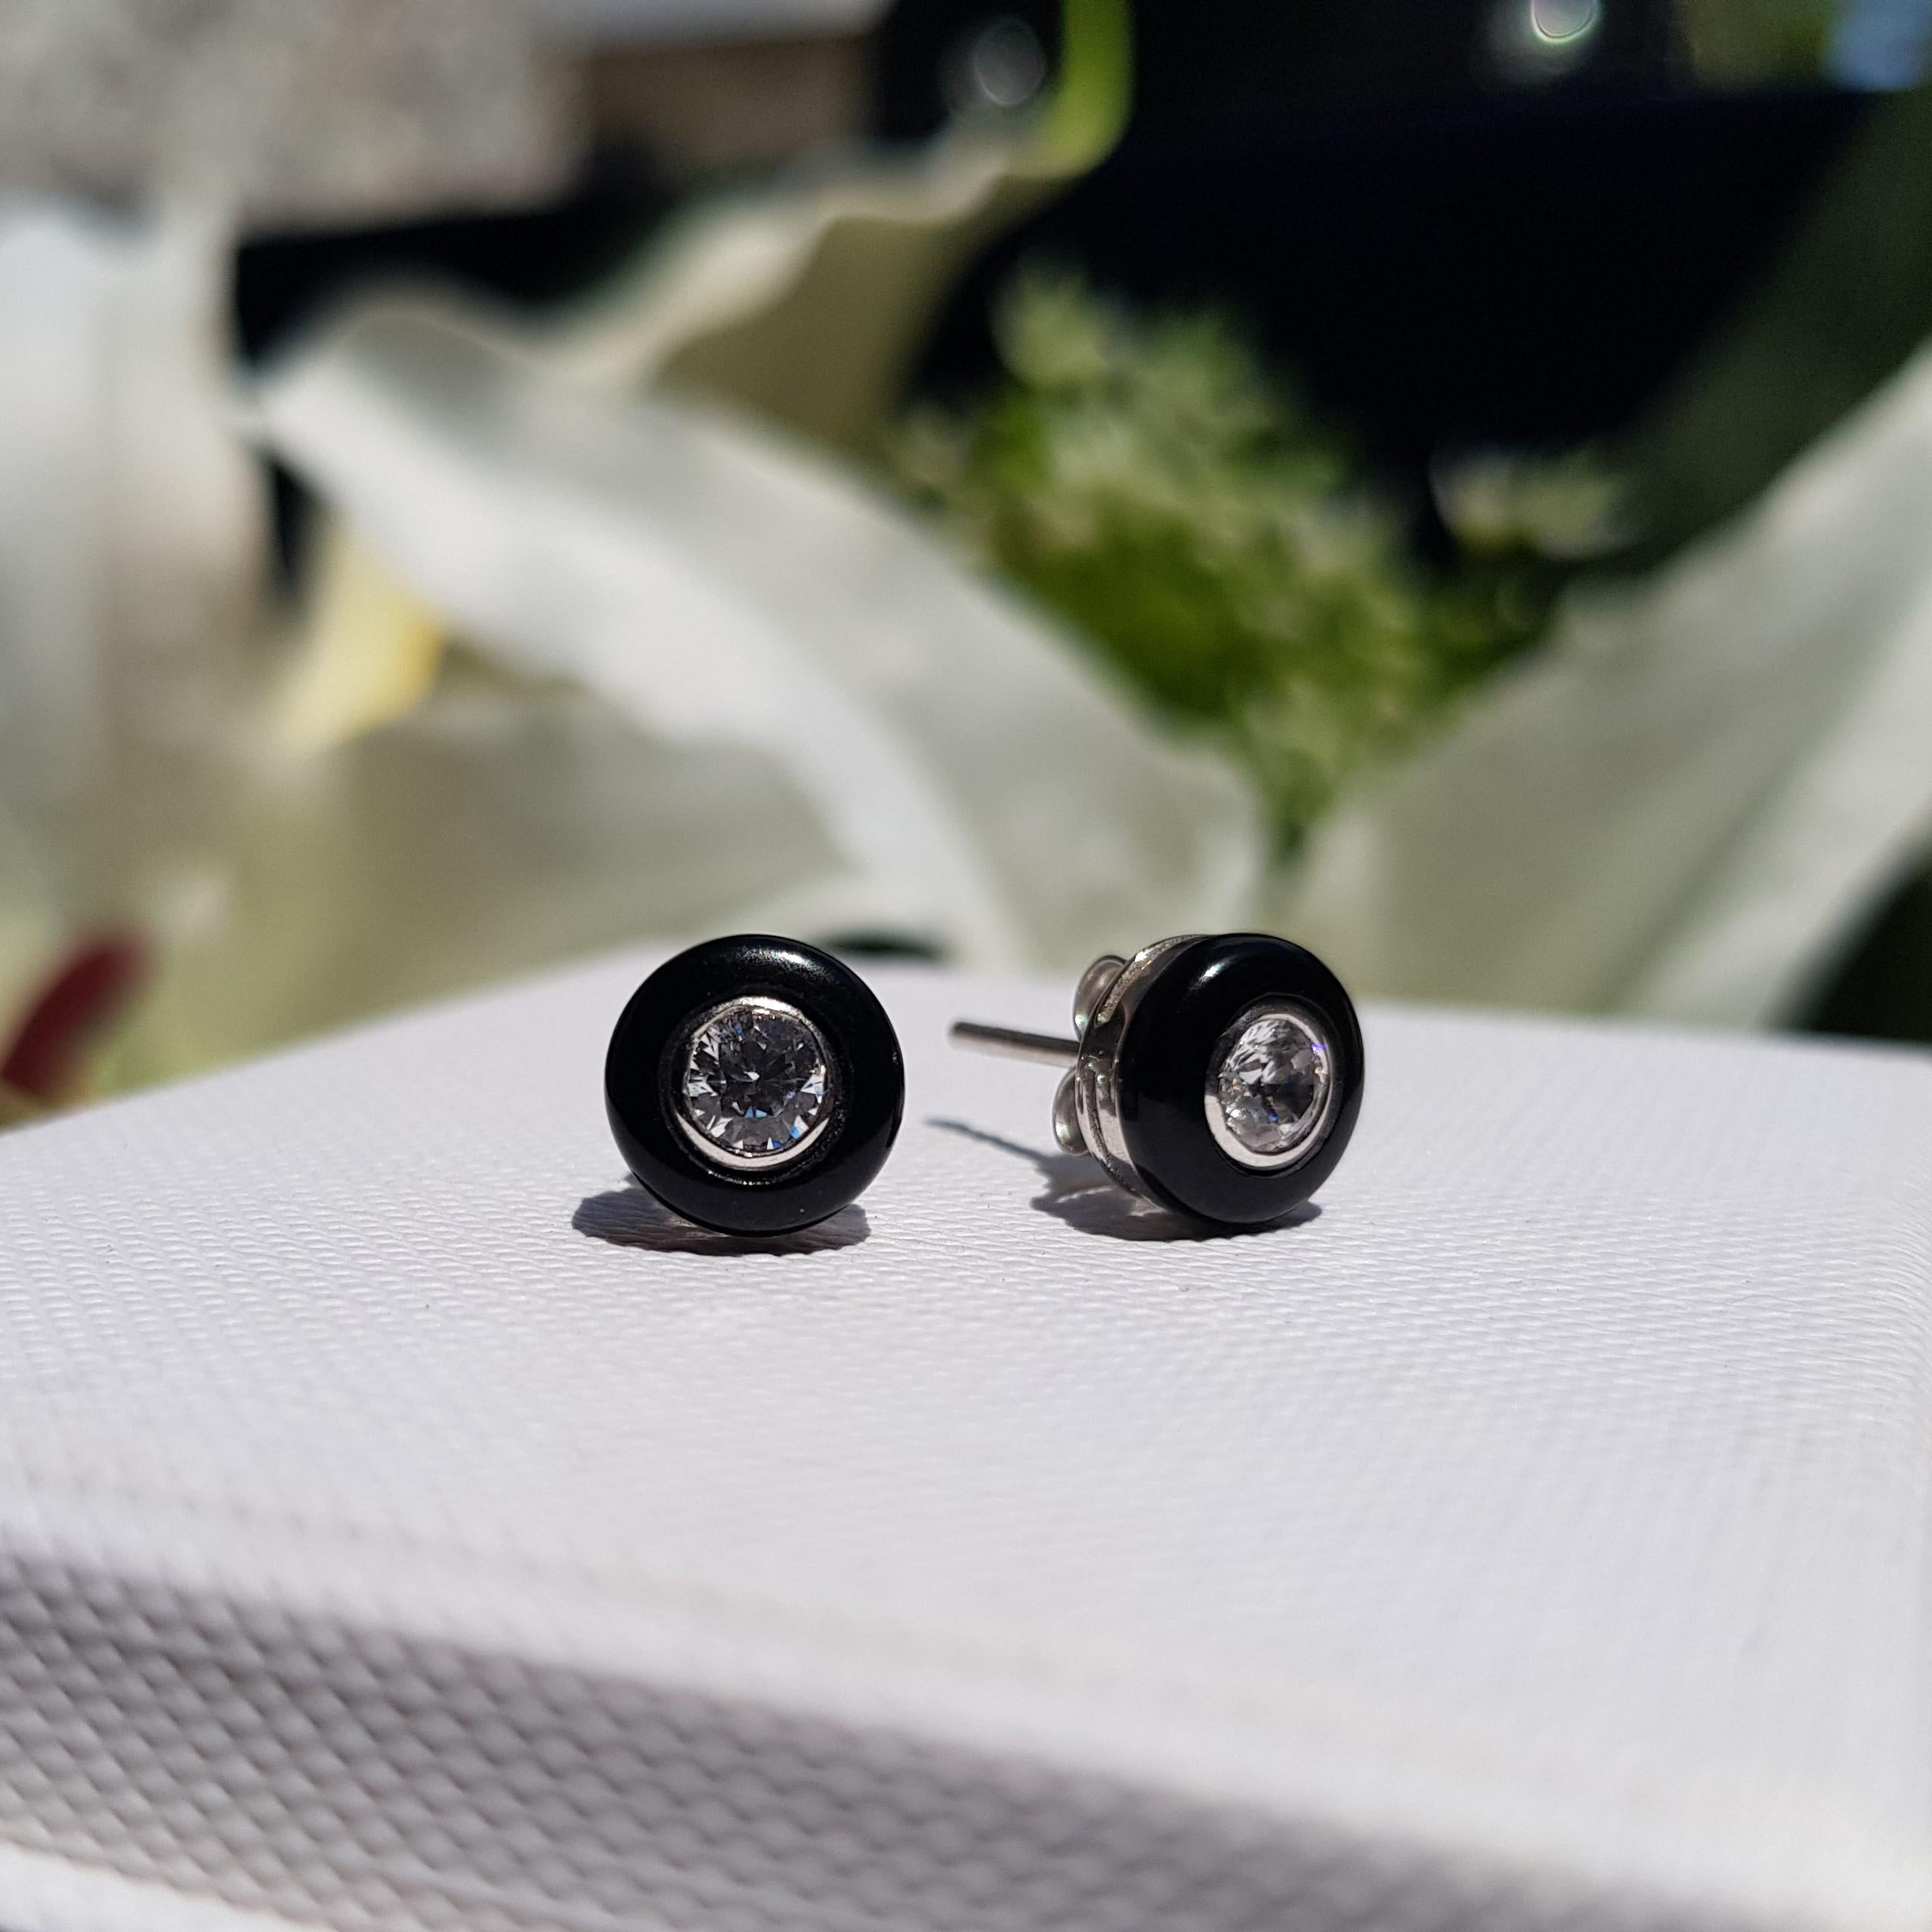 These Art-Deco stud earrings are completely spectacular! The onyx is a specialty cut to surround the excellent round brilliant cut center diamond, which is in a thin bezel. Crafted in 14k white gold.

Information
Style: Art Deco
Metal: 14K White